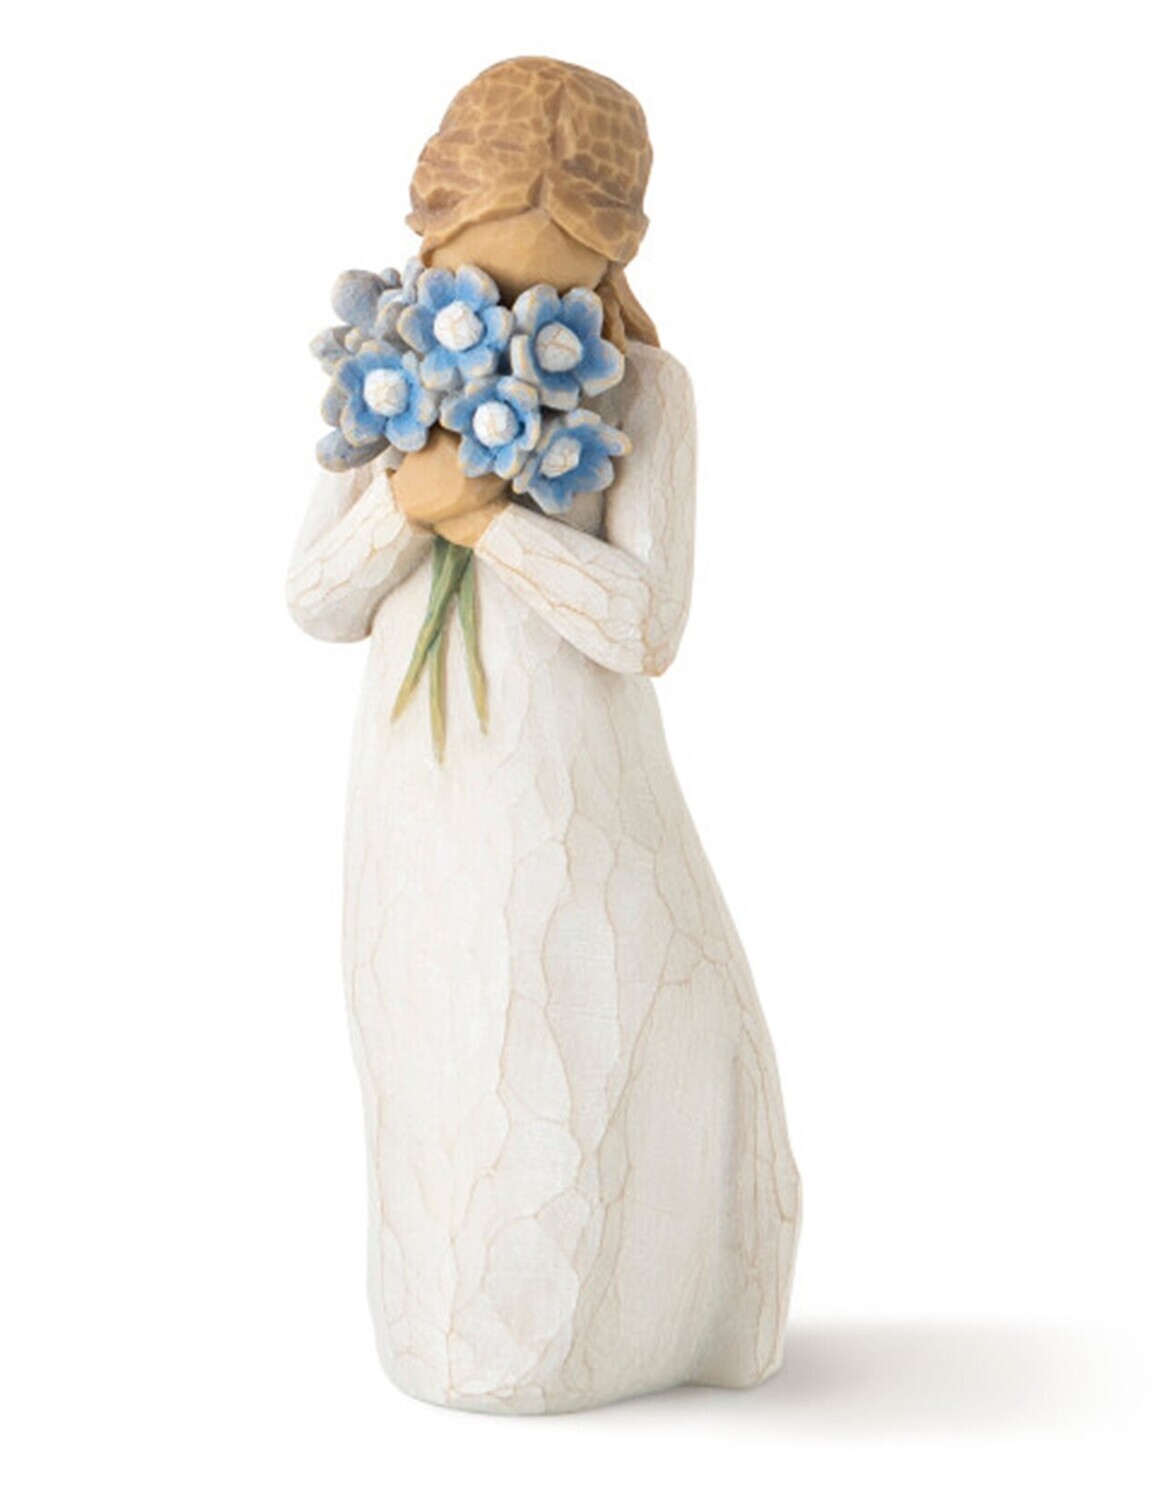 Willow Tree "Forget Me Not - Holding Thoughts of You Closely" 5" Figurine (26454)